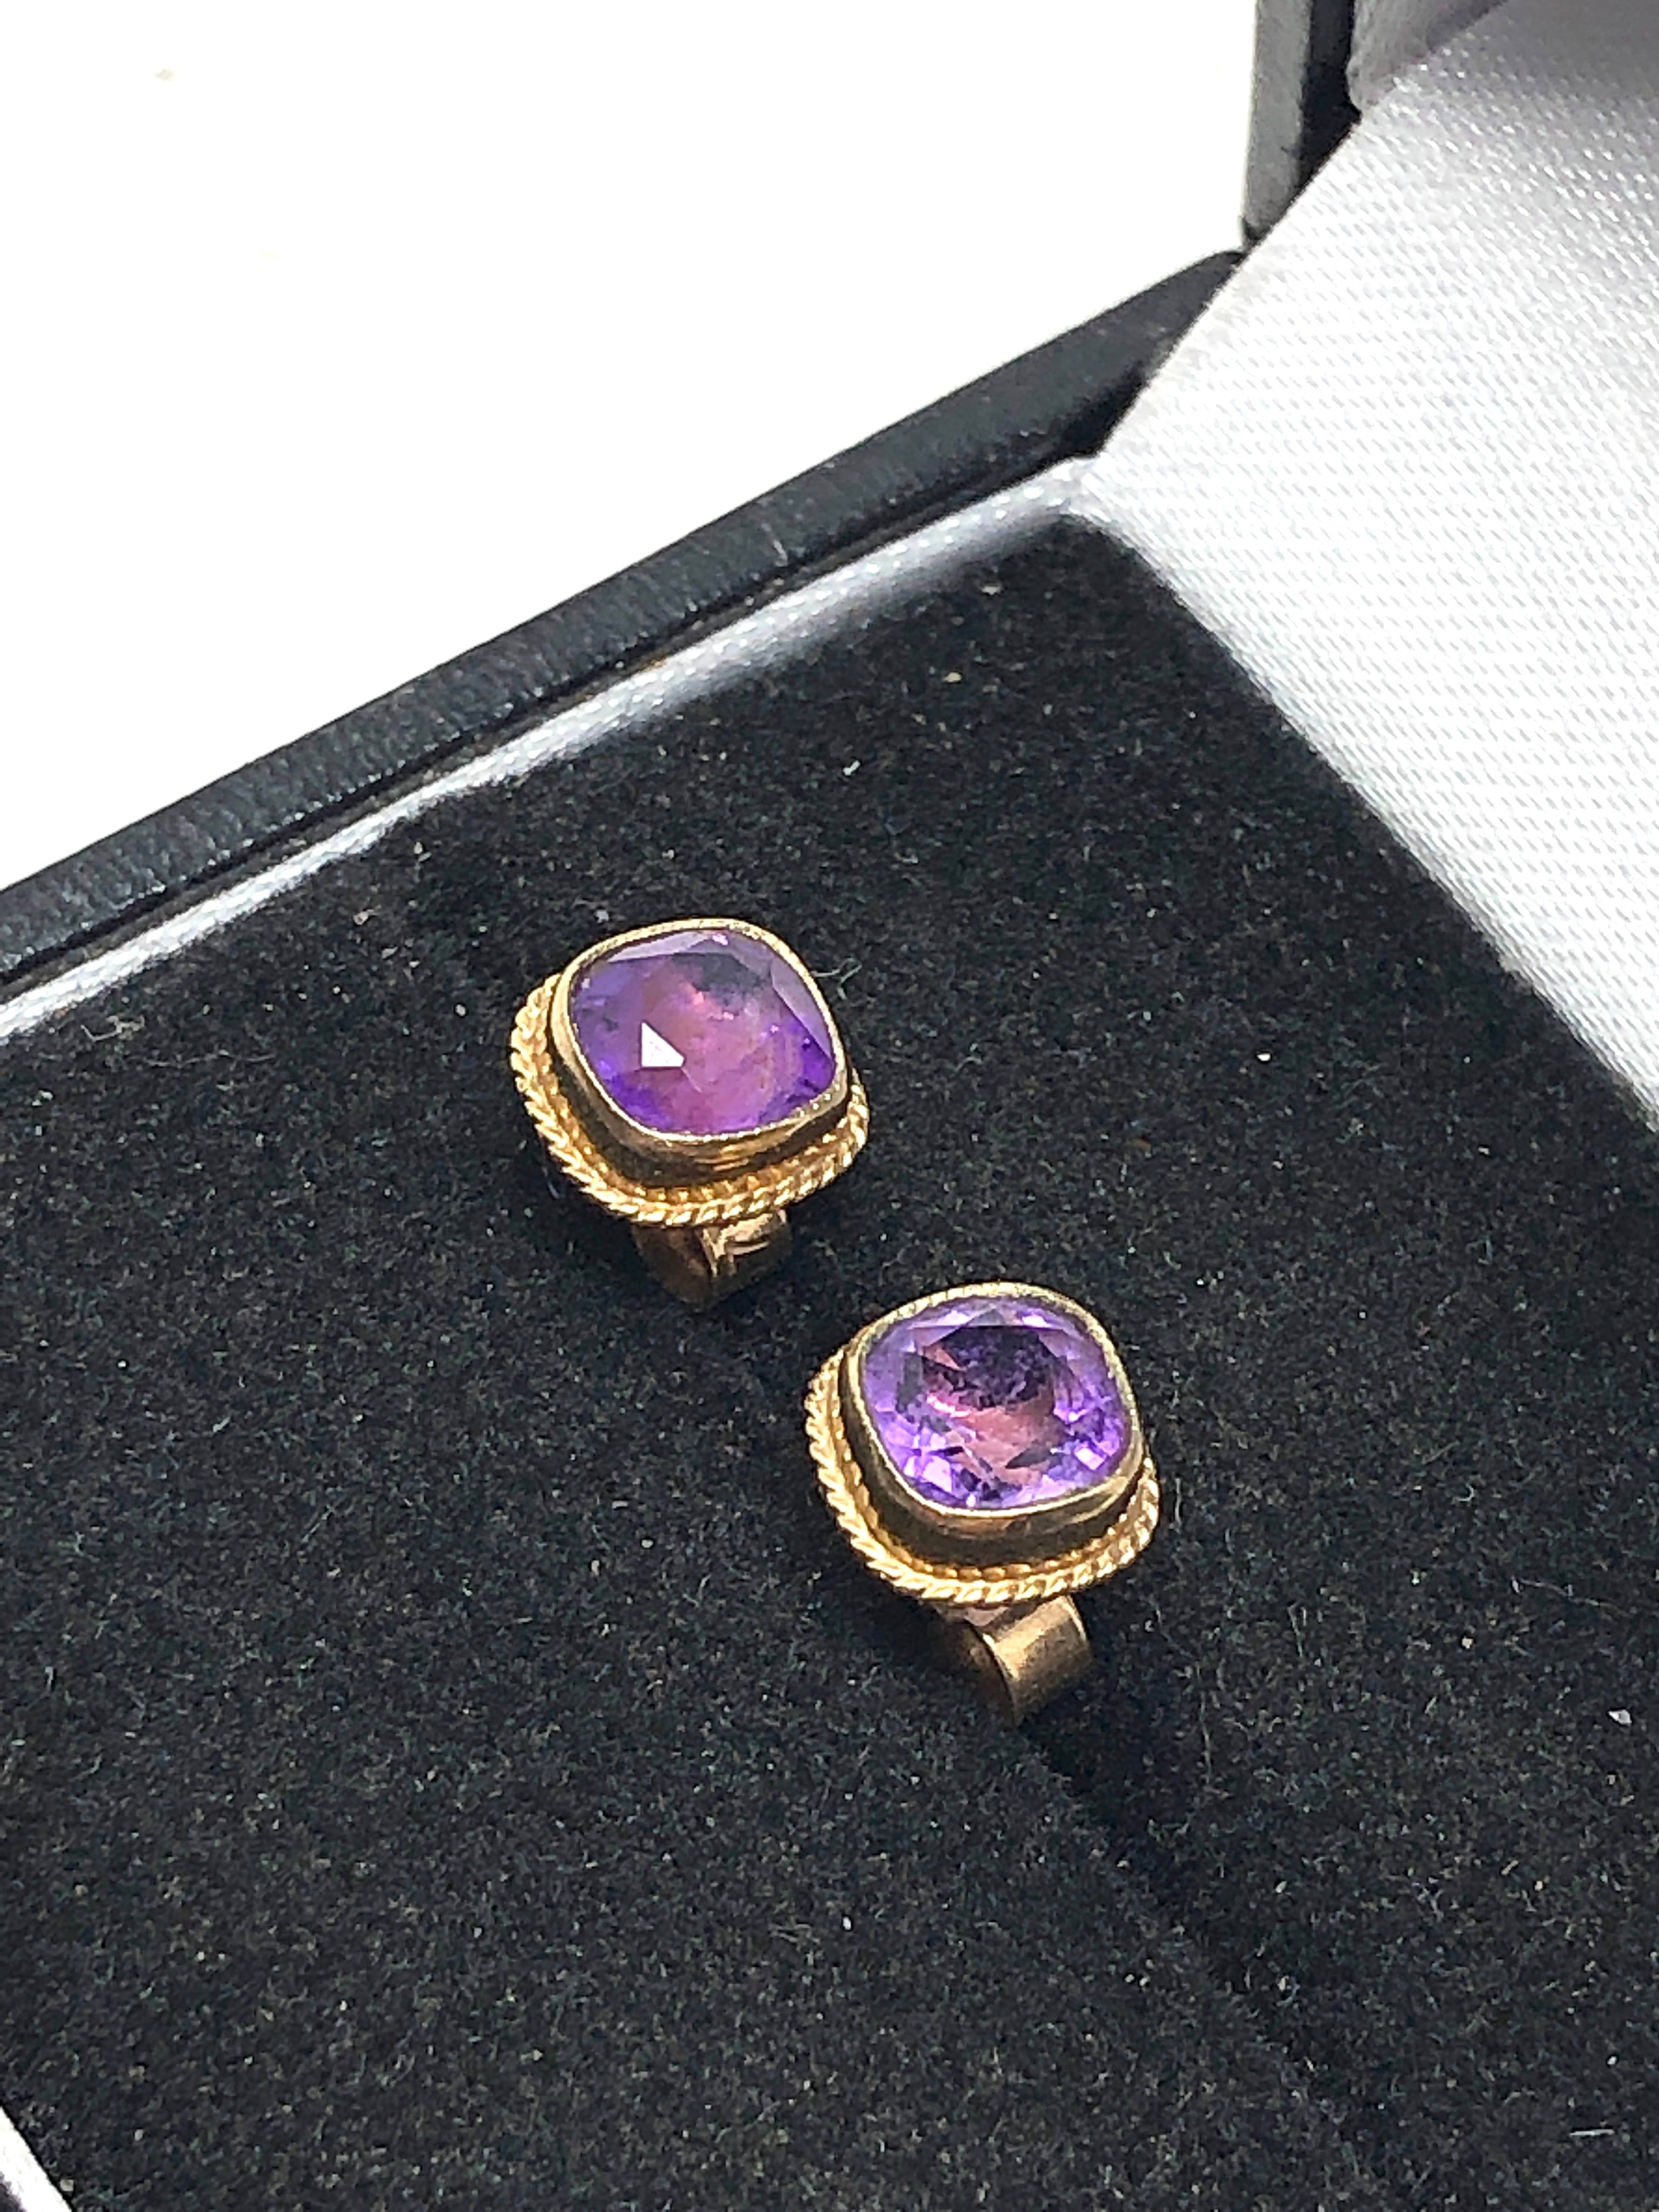 9ct gold amethyst earrings weight 1.1g - Image 2 of 4